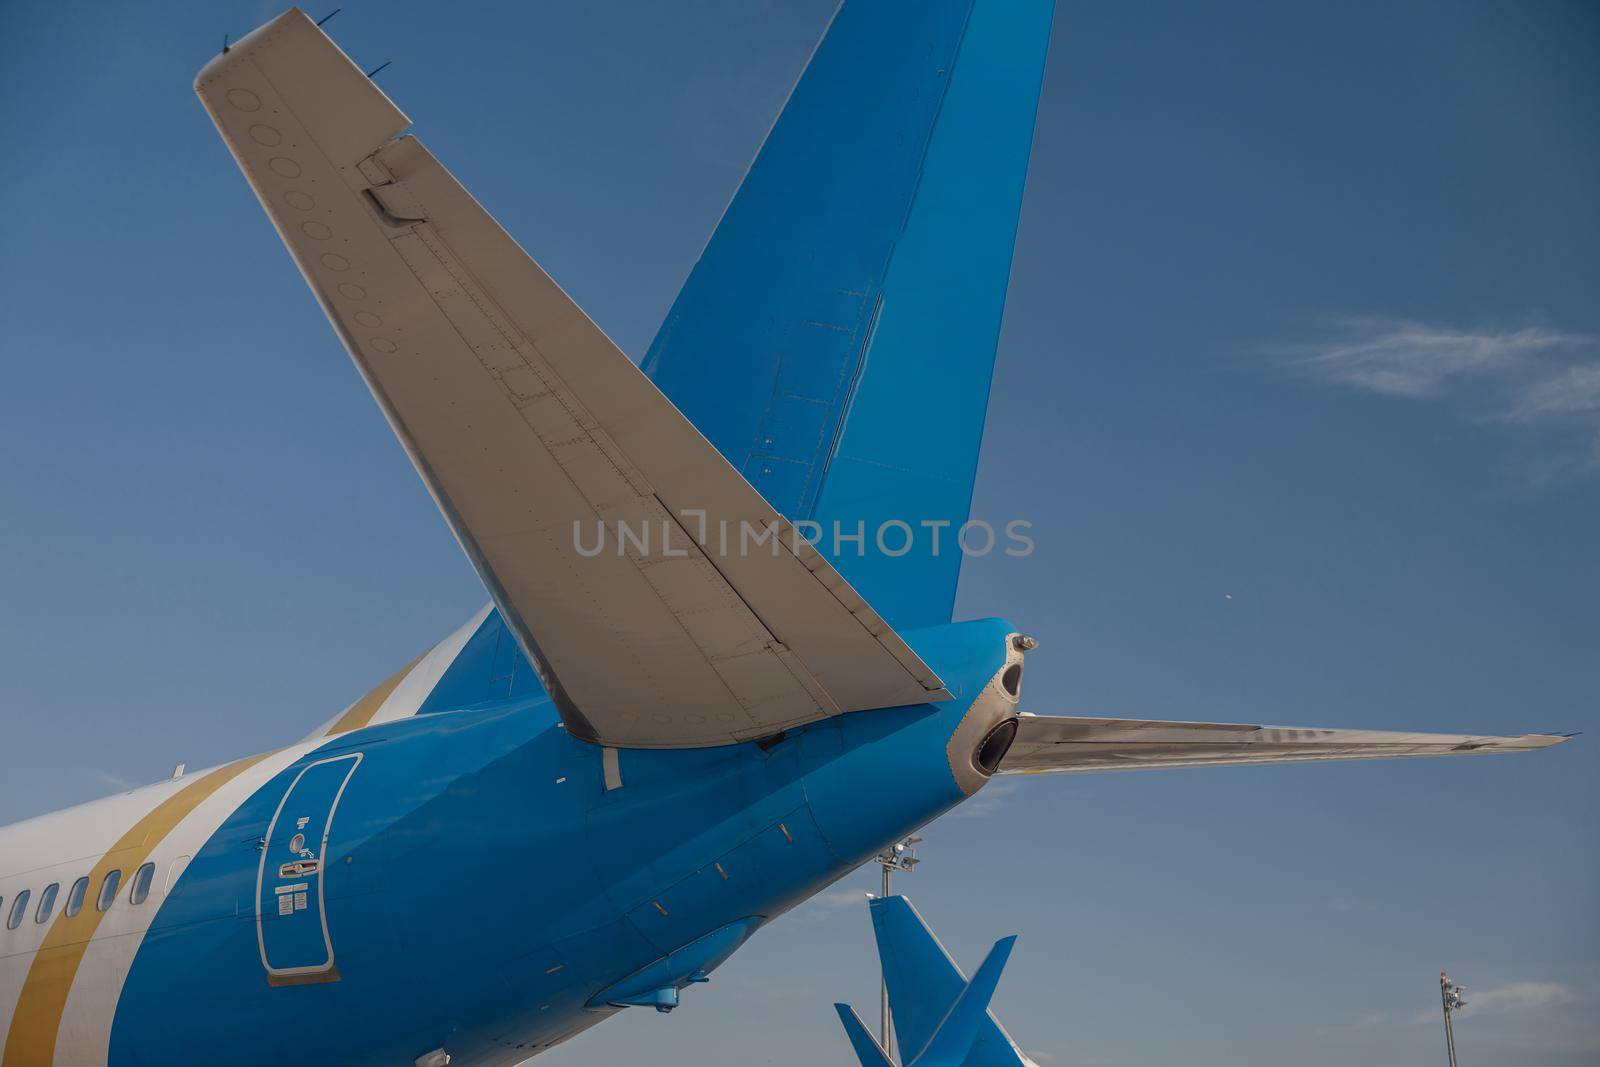 Tail of an aircraft in airport with blue sky in the background by Yaroslav_astakhov